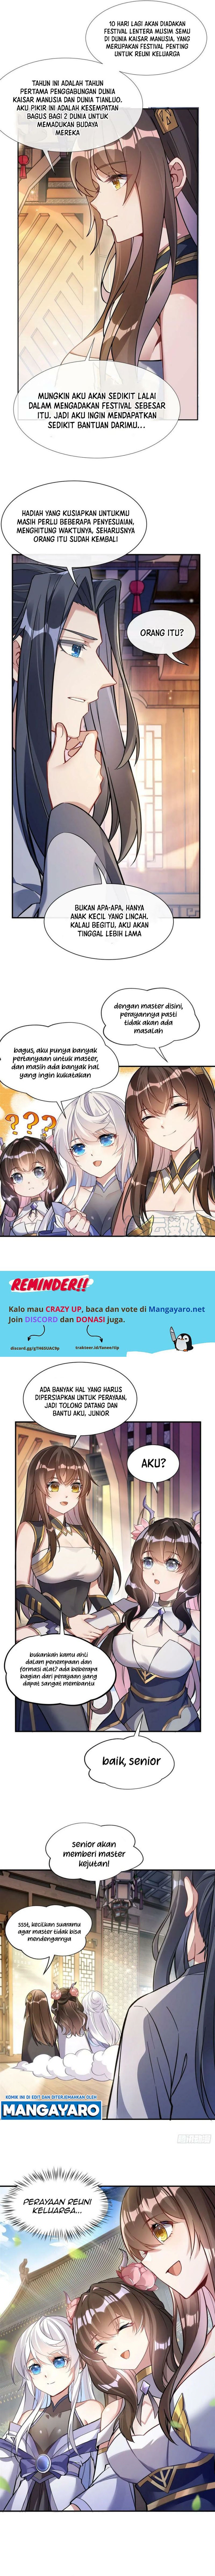 Dilarang COPAS - situs resmi www.mangacanblog.com - Komik my female apprentices are all big shots from the future 161 - chapter 161 162 Indonesia my female apprentices are all big shots from the future 161 - chapter 161 Terbaru 6|Baca Manga Komik Indonesia|Mangacan